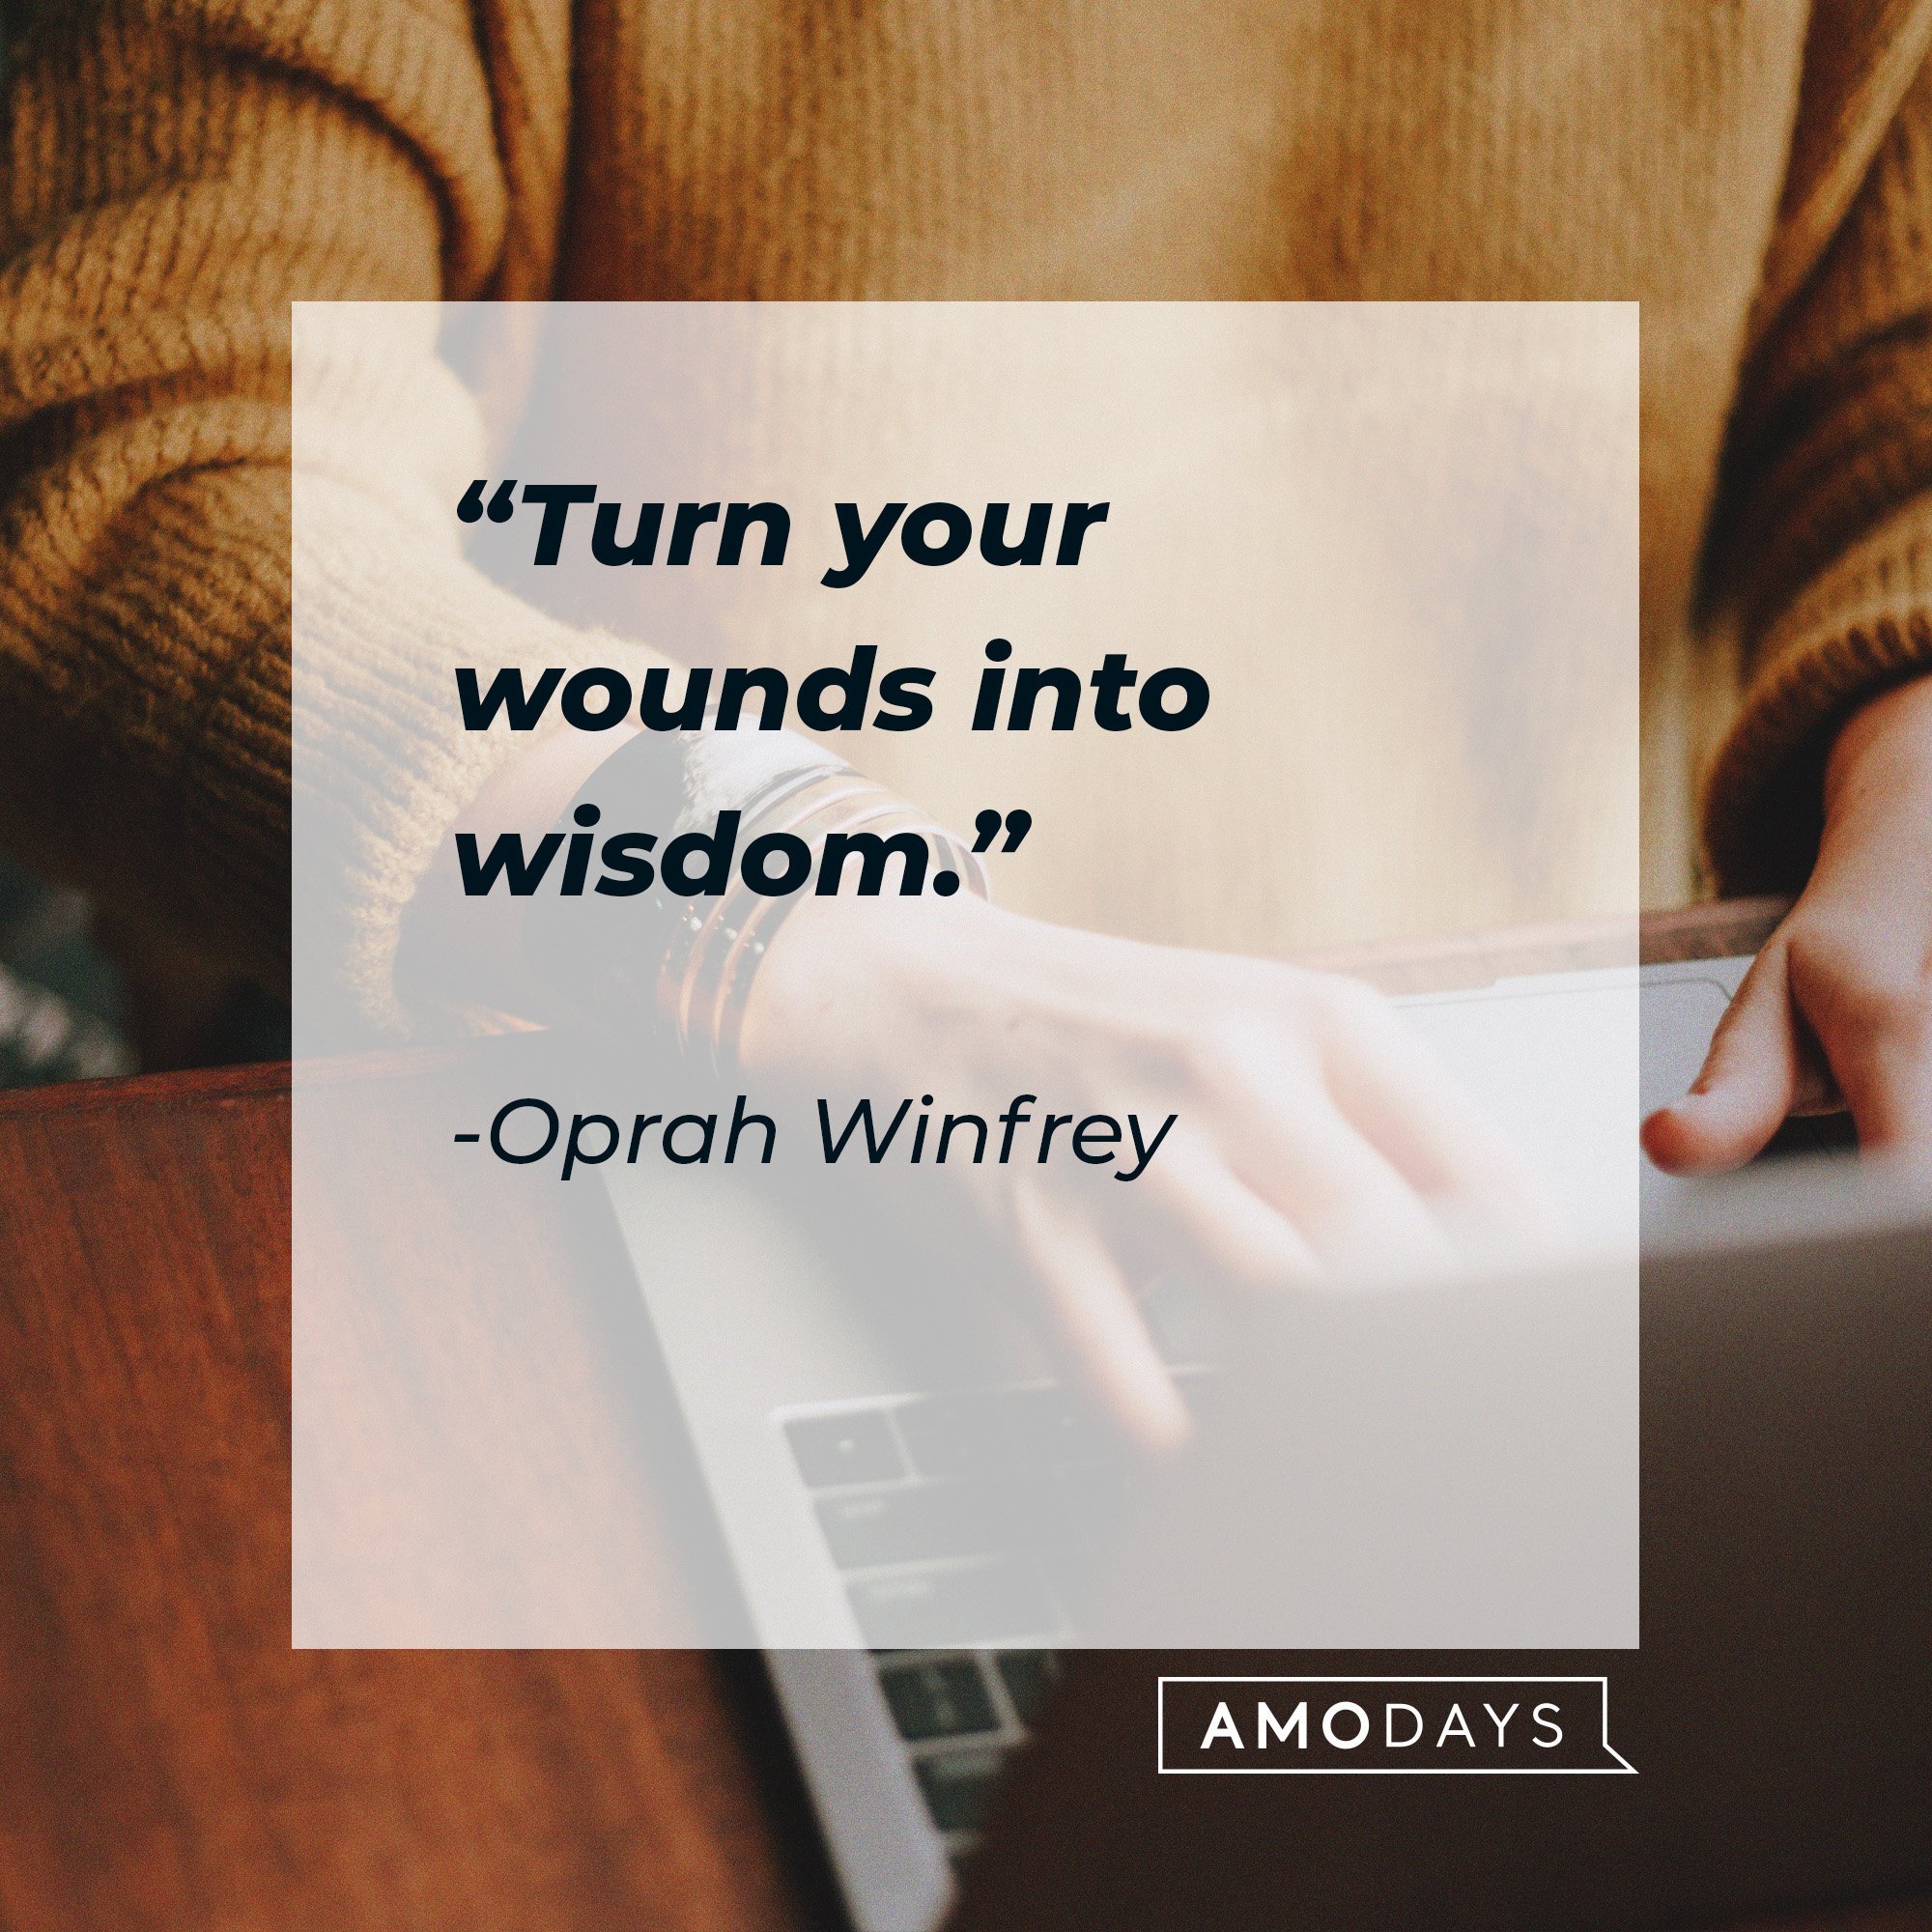 Oprah Winfrey's quote: “Turn your wounds into wisdom.” | Image: AmoDays